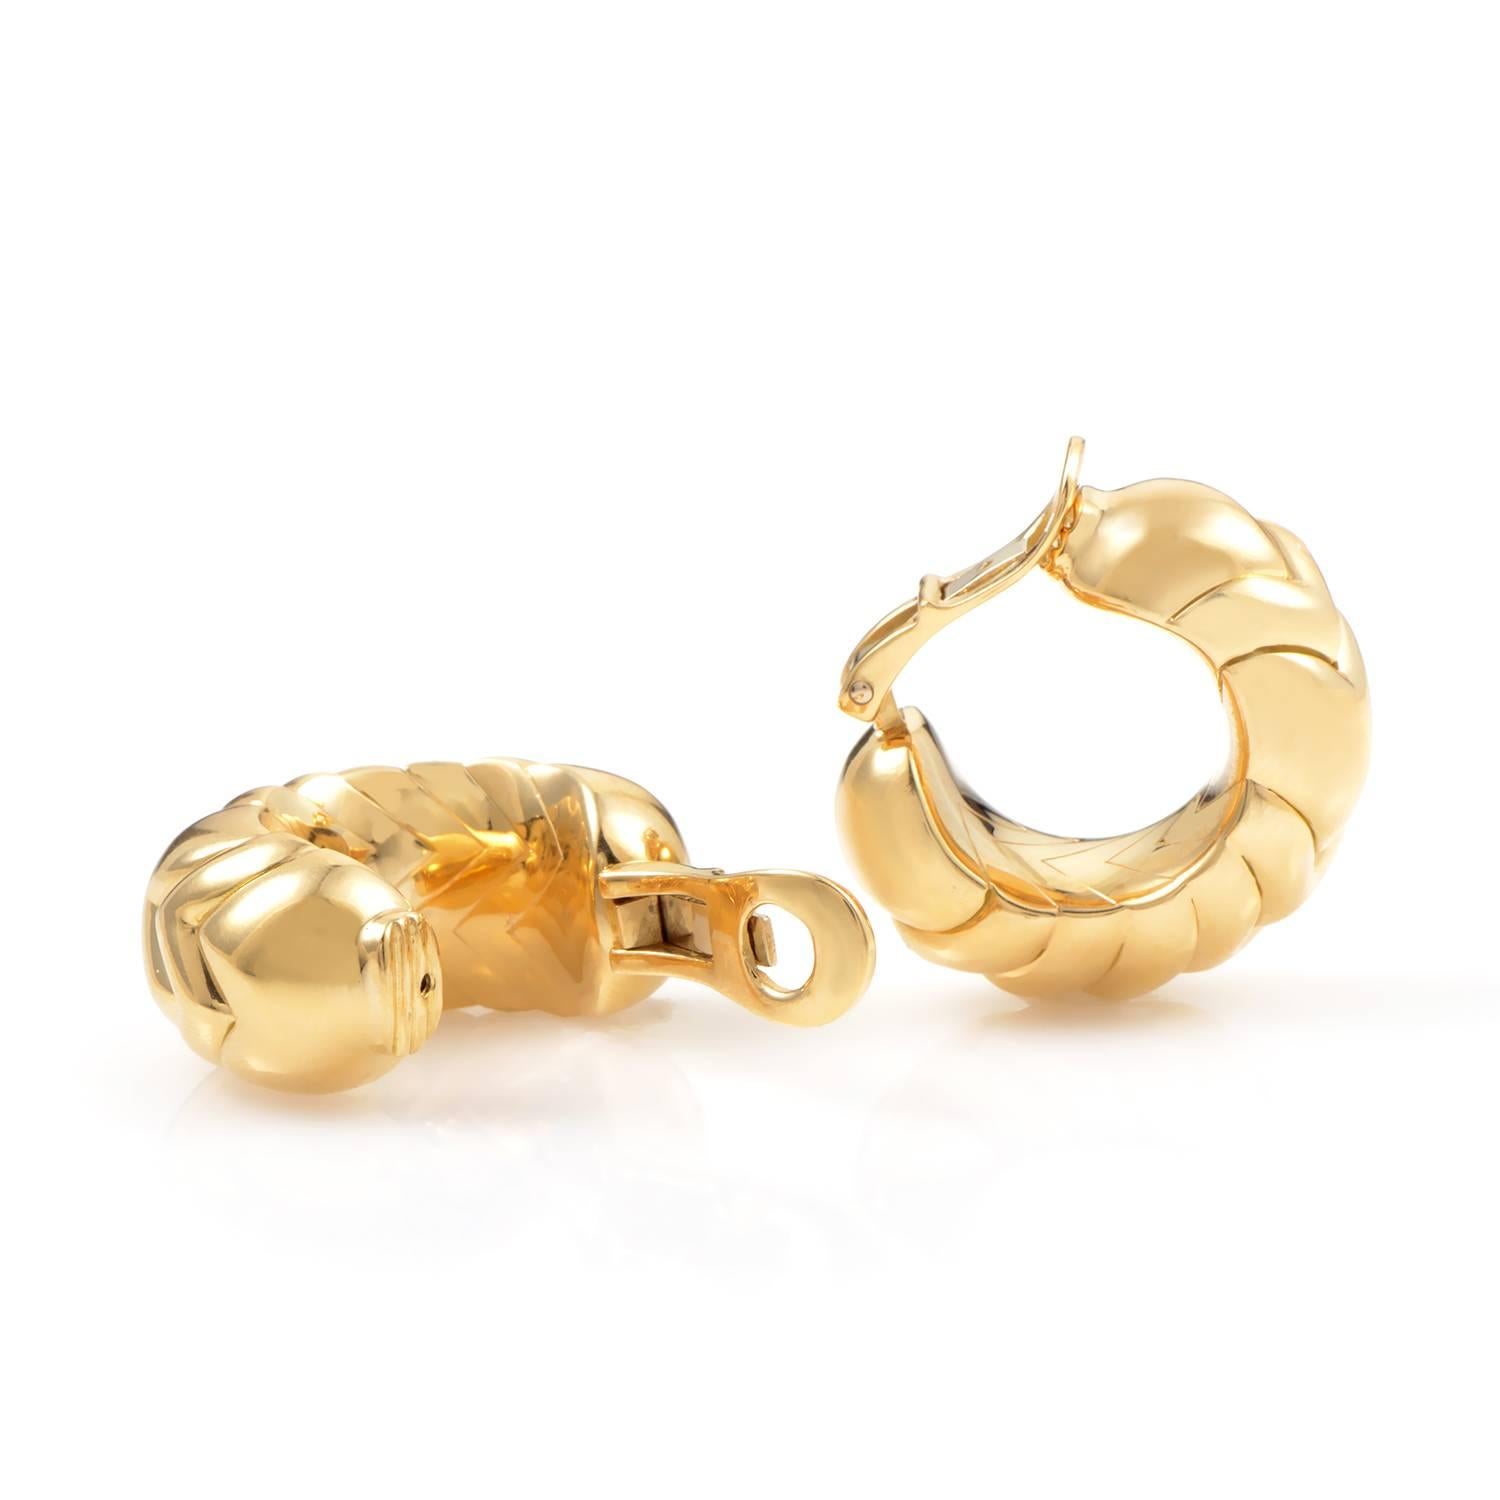 This Spiga collection from Bulgari is renowned for its uniquely designed pieces. This pair of earrings from the collection are made of 18K yellow gold, and are carved into the collection's signature design.
Included Items: Manufacturer's Box